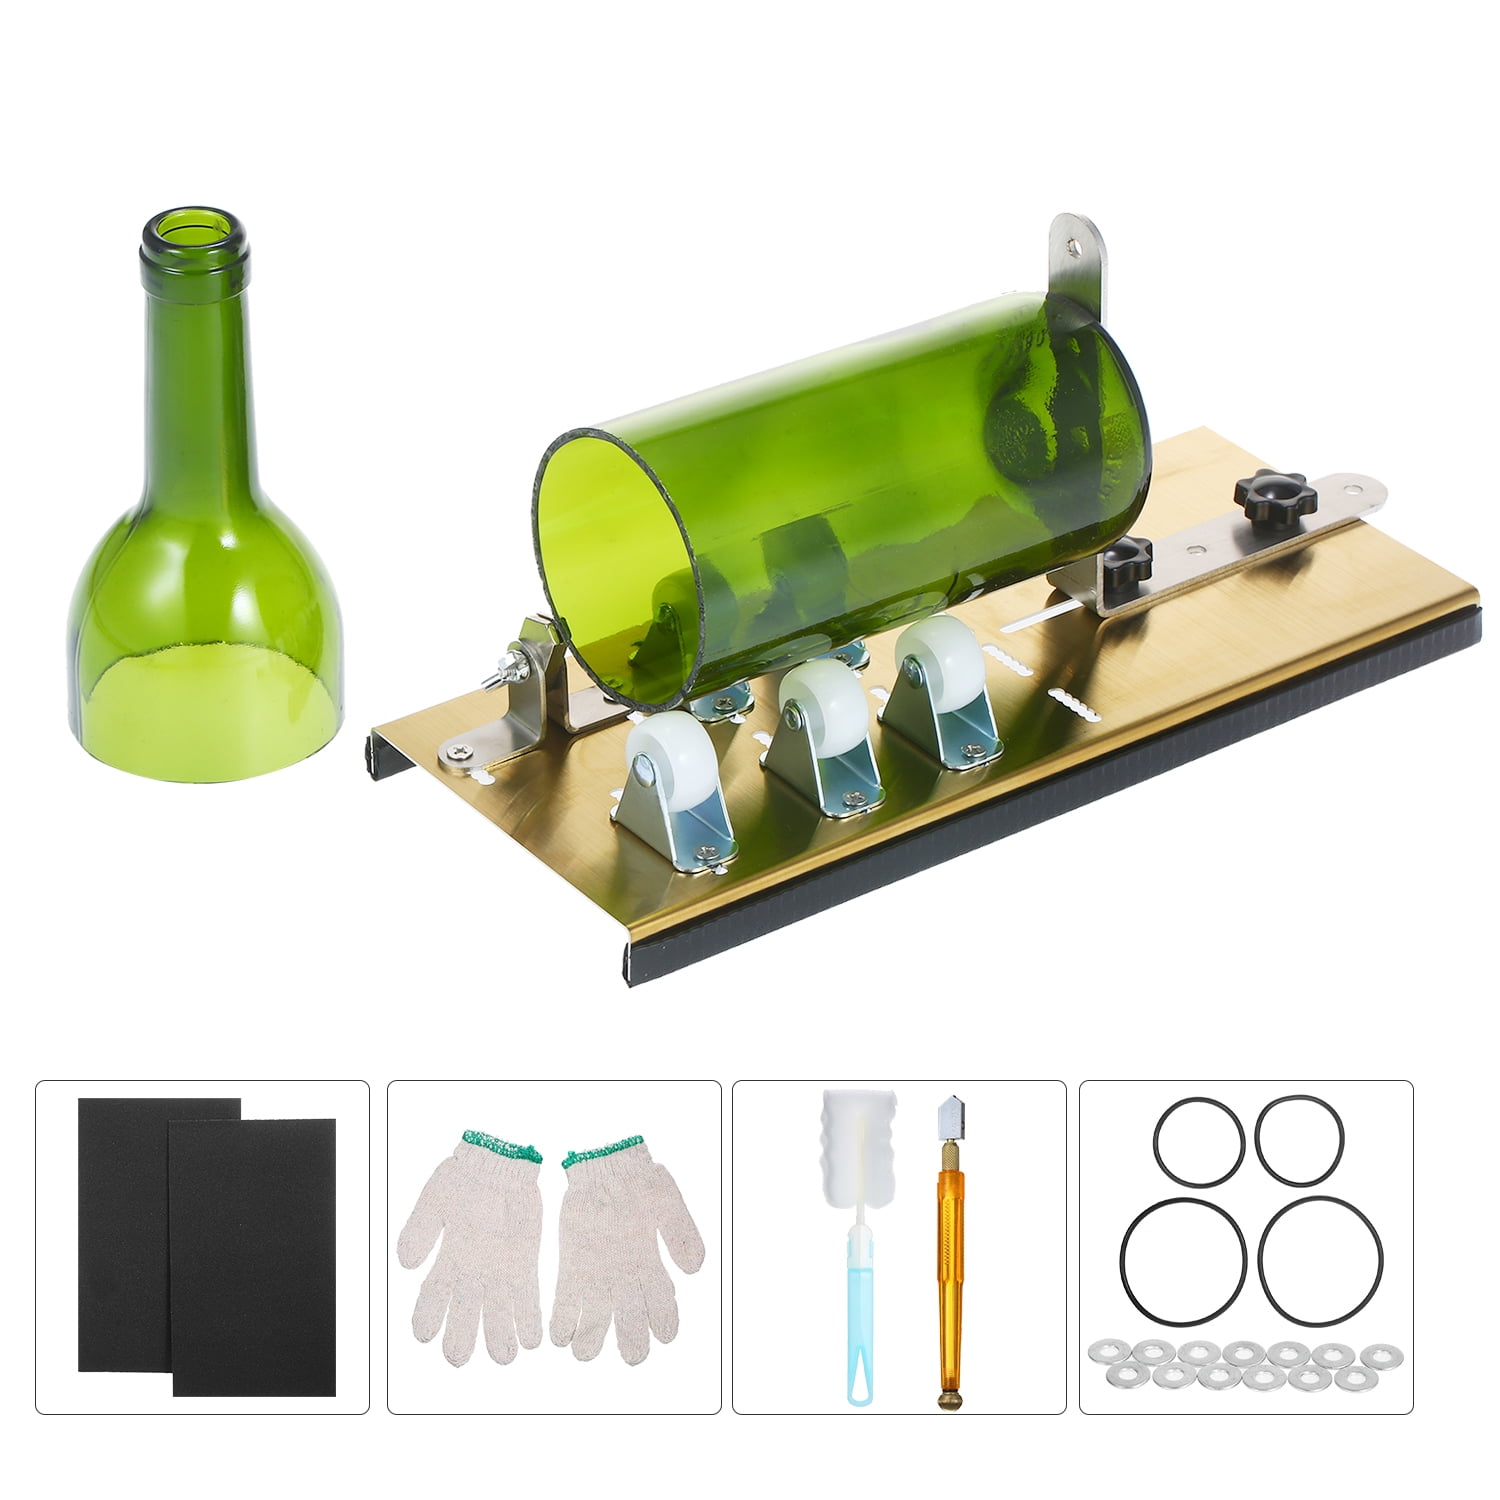 Glass Bottle Cutter Kit Glass Cutting Machine Tool for Jar Recycle DIY